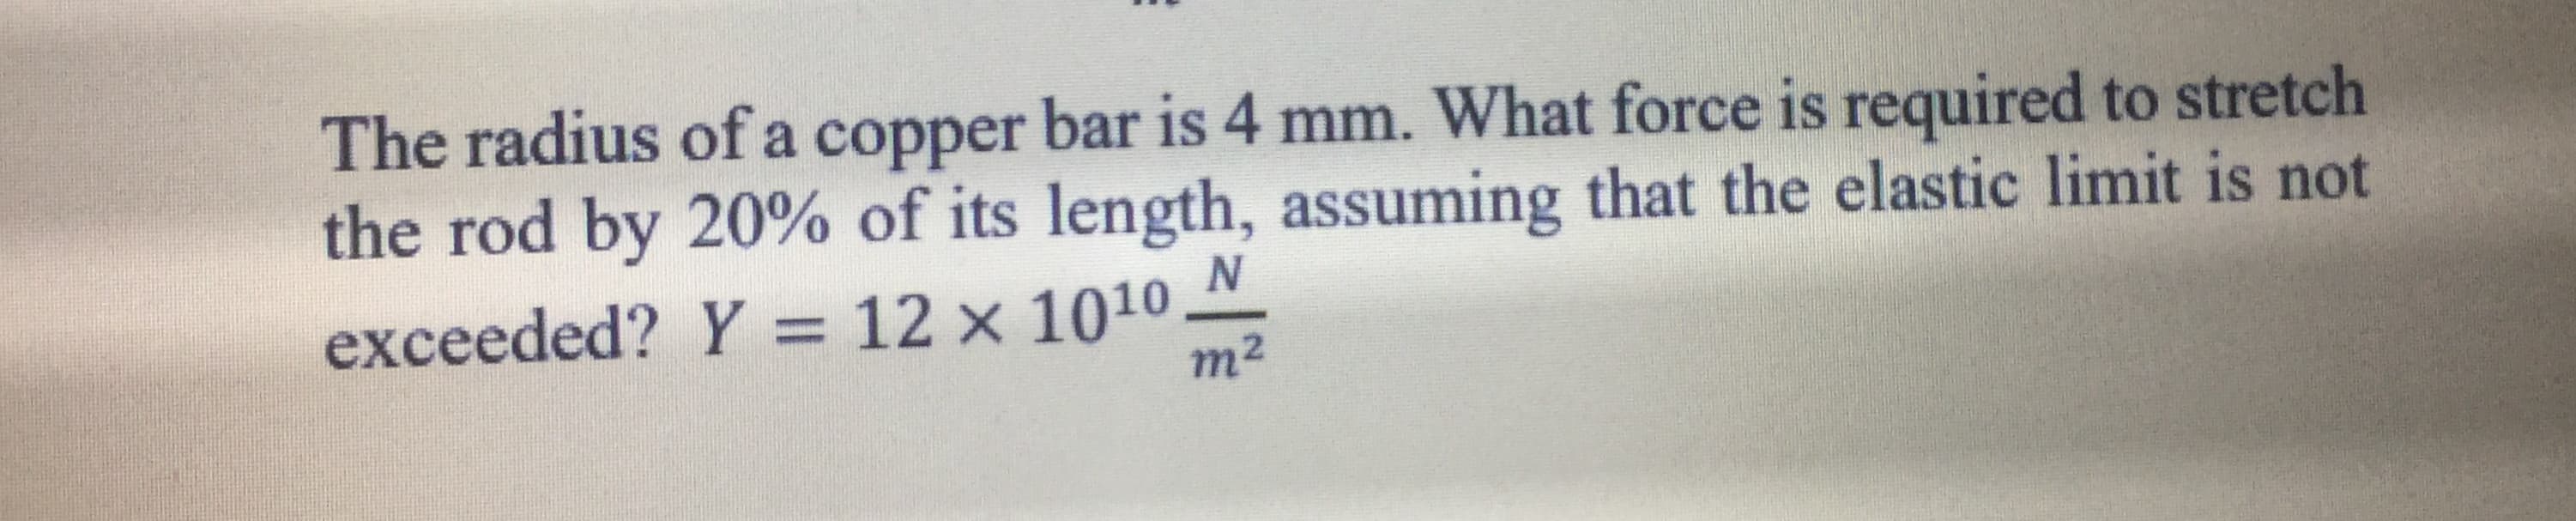 The radius of a copper bar is 4 mm. What force is required to stretch
the rod by 20% of its length, assuming that the elastic limit is not
N
exceeded? Y = 12 × 1010 M
